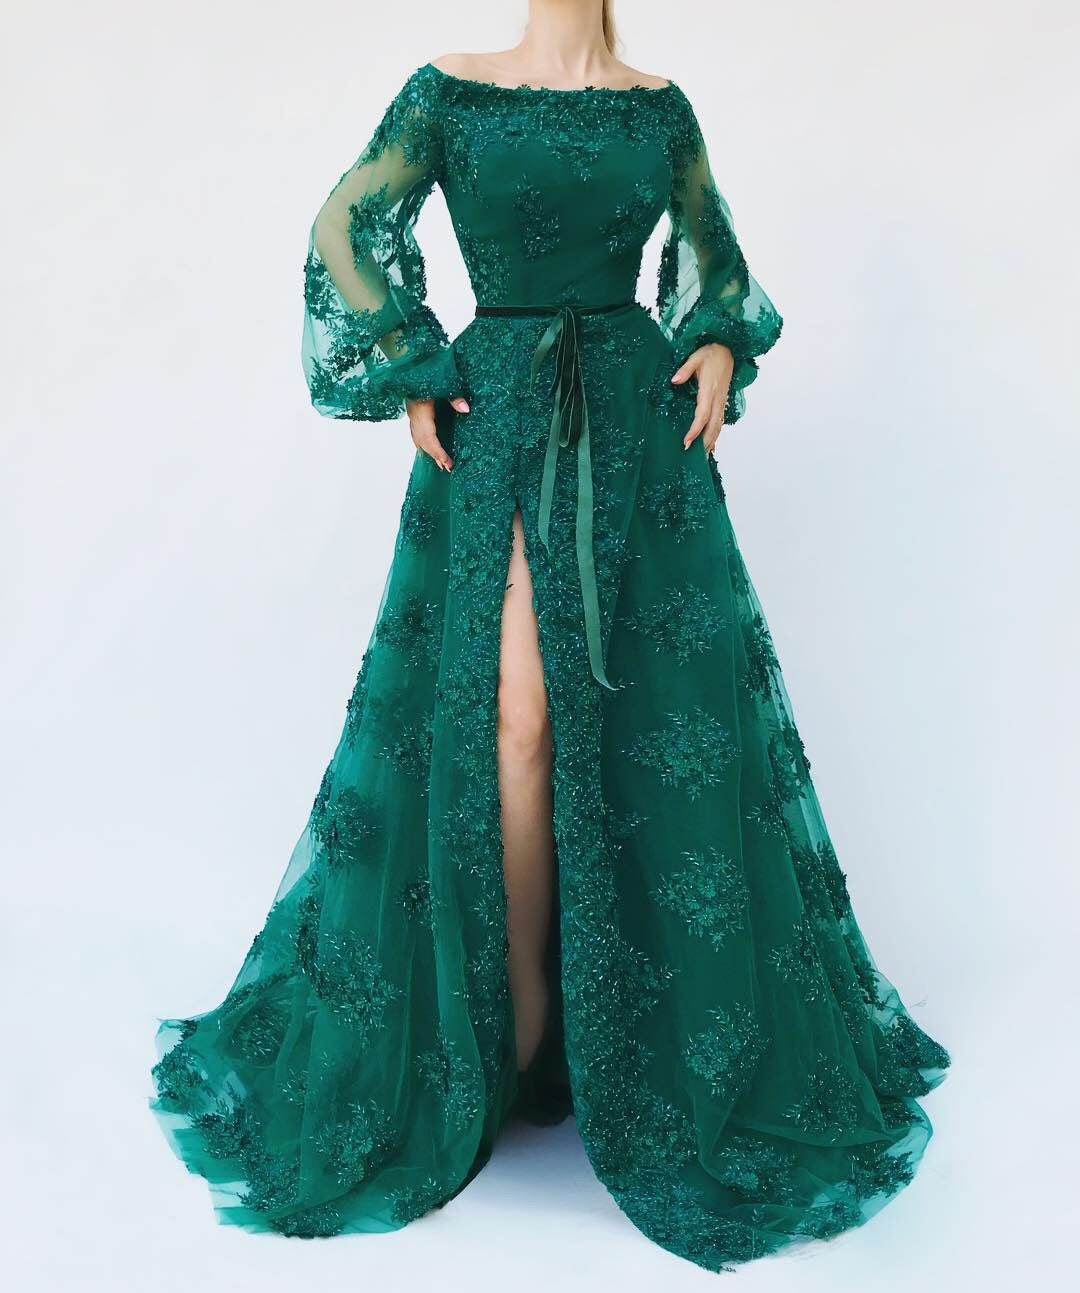 Green A-Line dress with embroidery and long off the shoulder sleeves